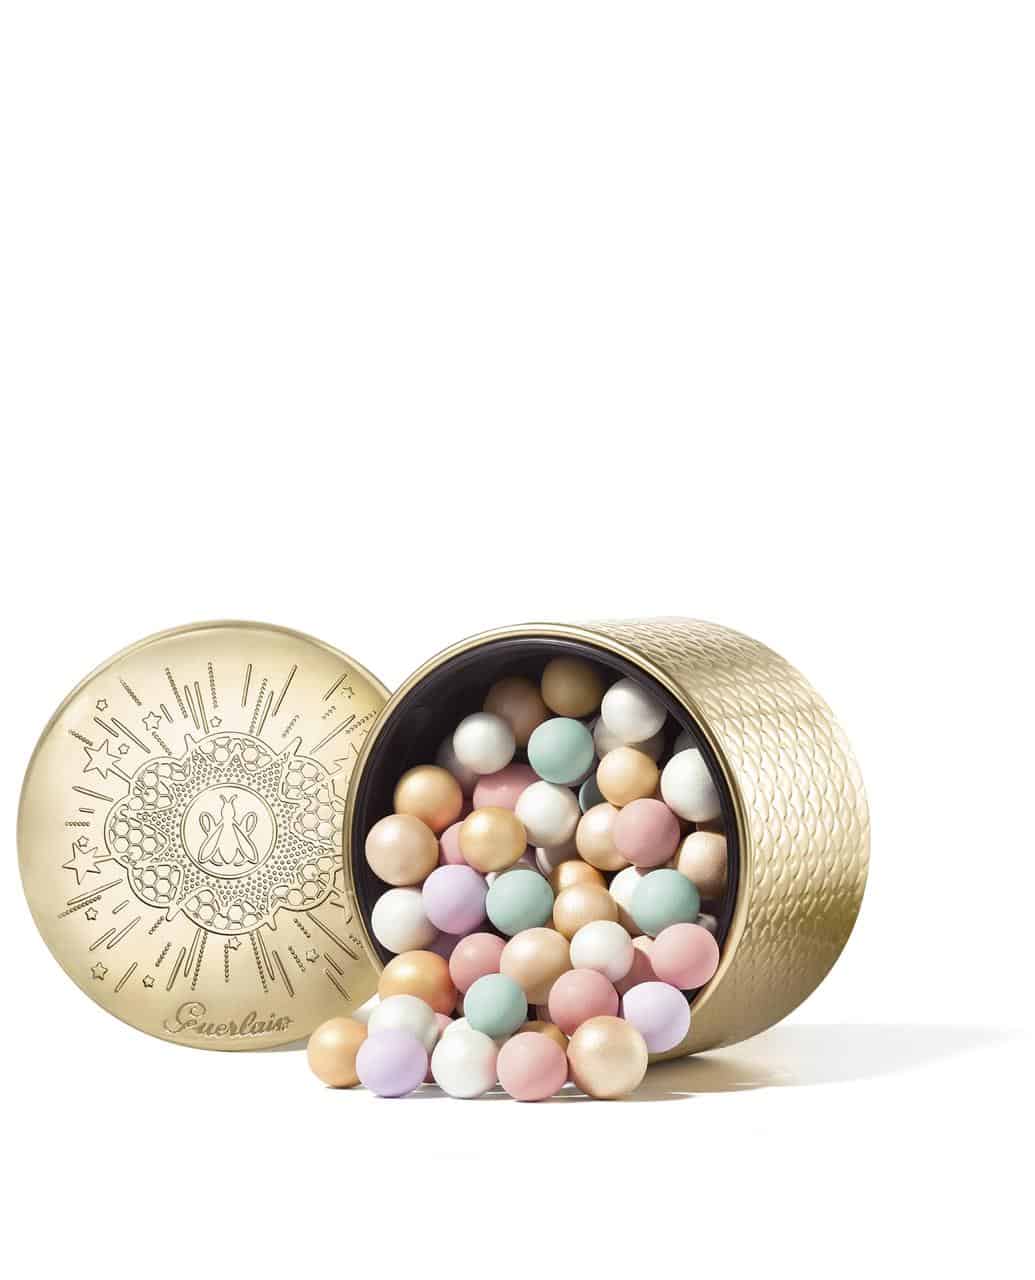 Holiday 2020 collection from Guerlain Golden B collection